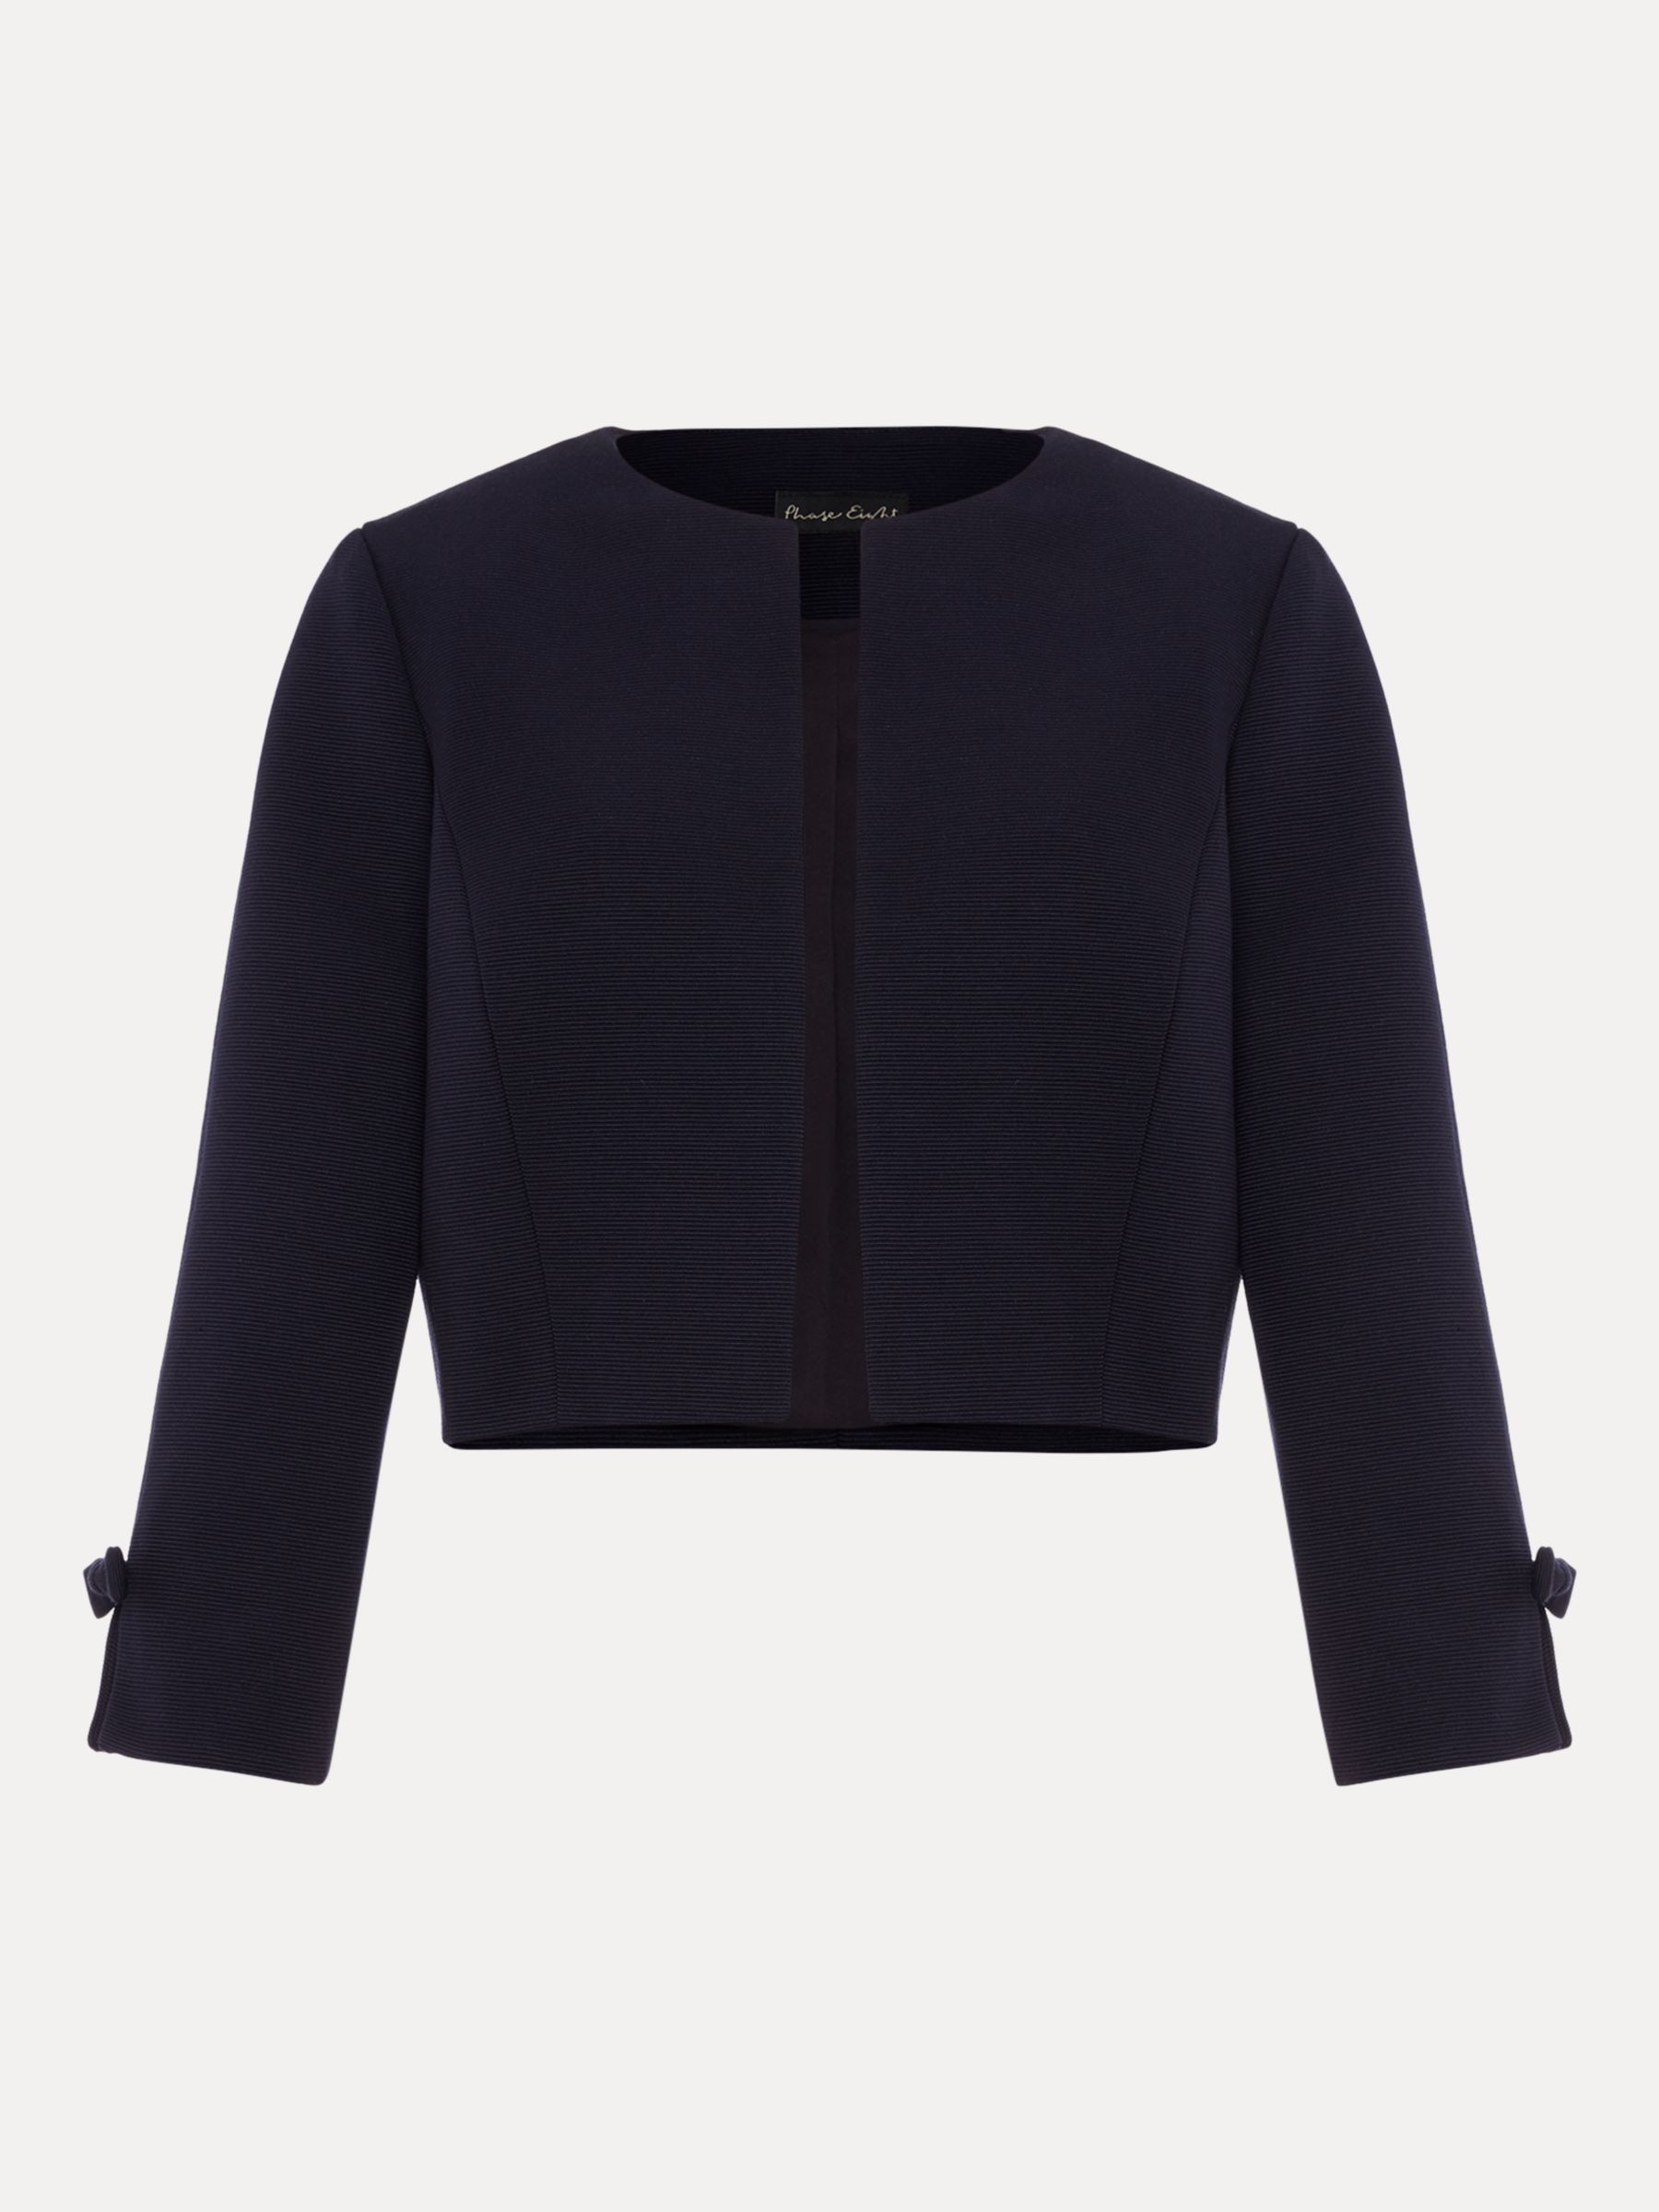 Buy Phase Eight Zoelle Bow Detail Cuff Jacket Online at johnlewis.com